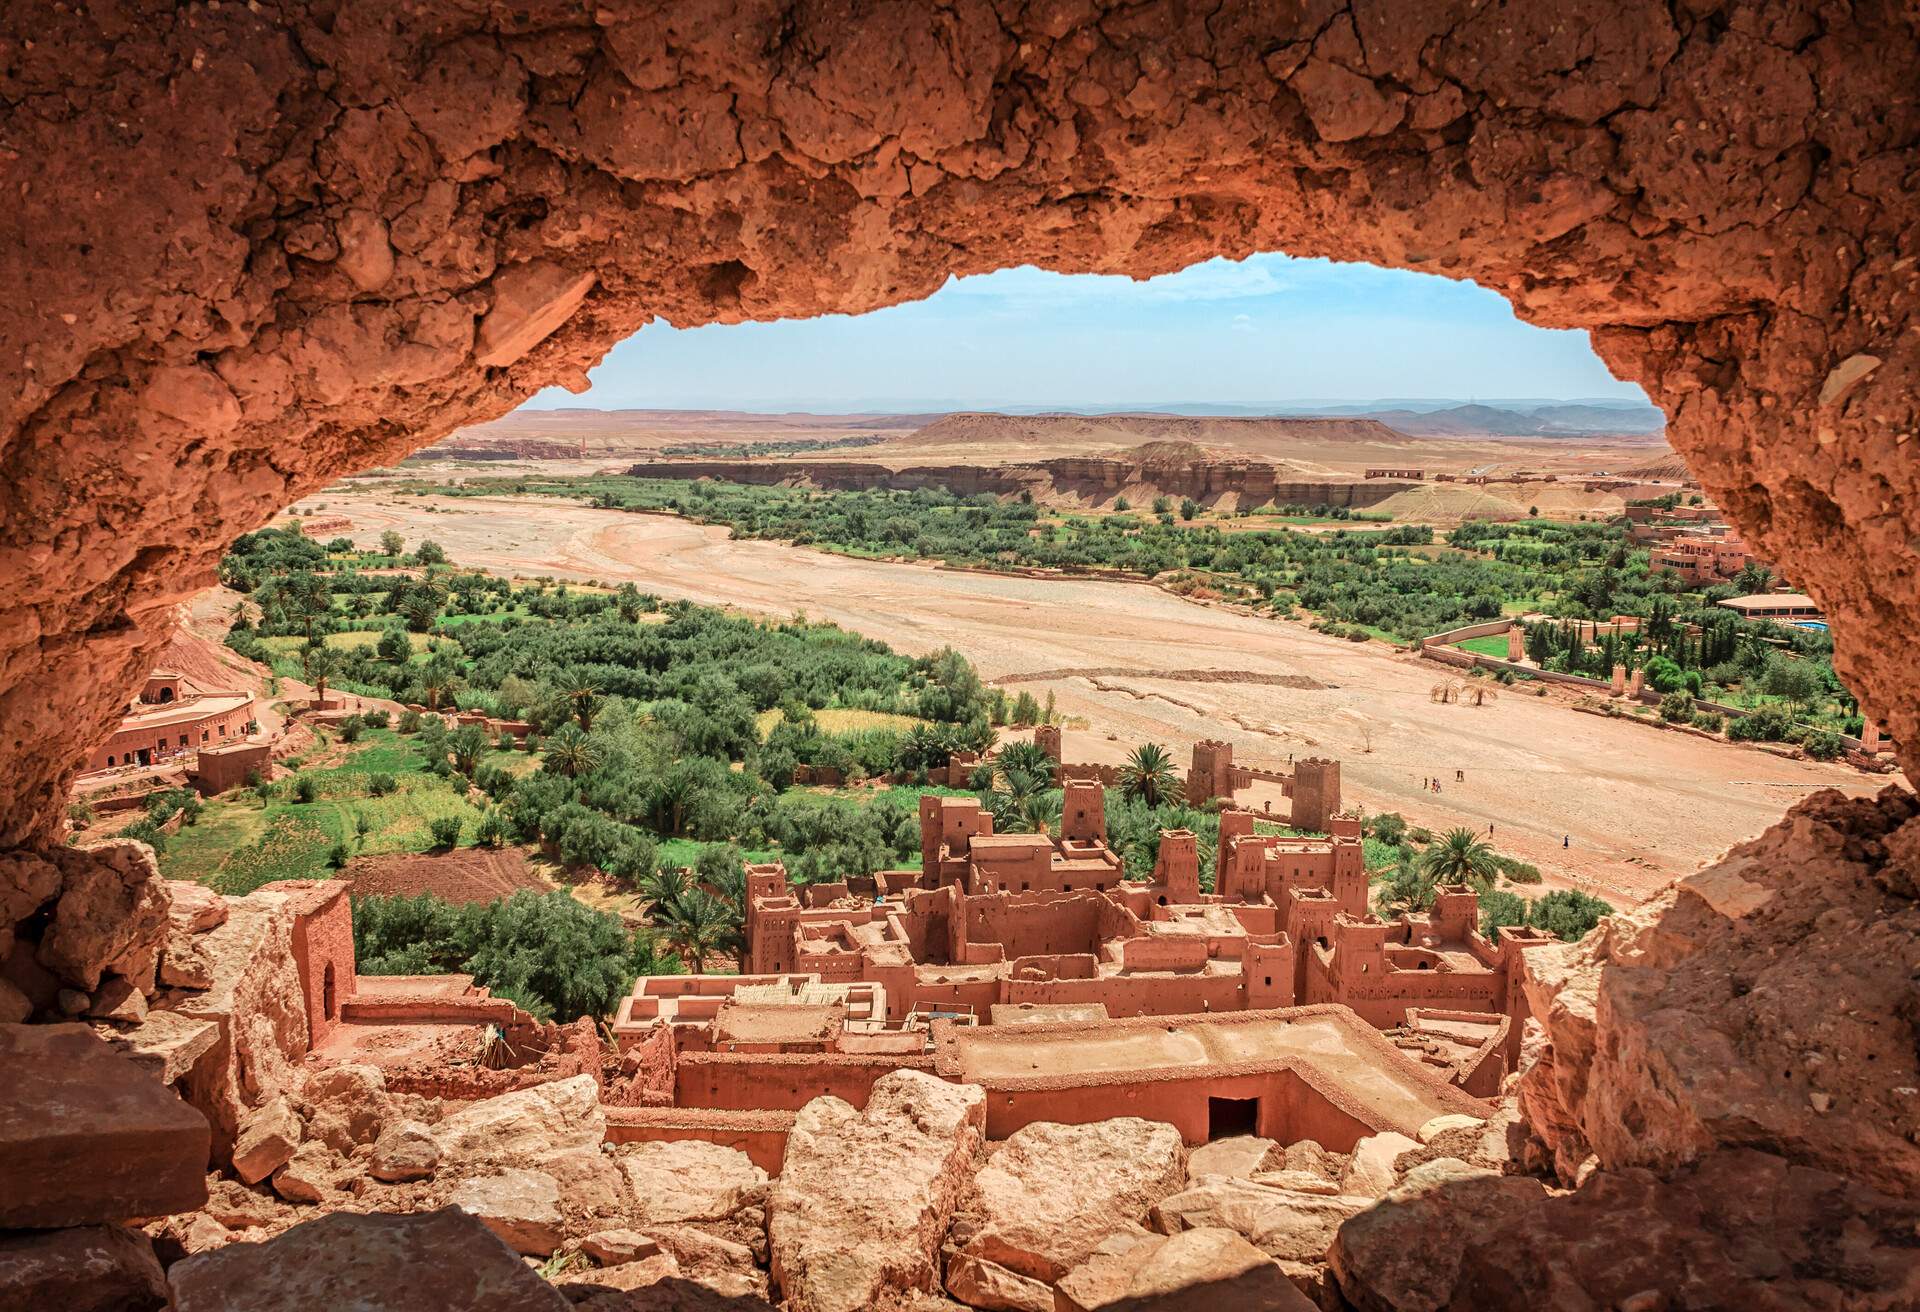 Popular point of view of the valley of the desolating river Onila through a hole in a wall of Ancient Kasbah in Ait-Ben-Haddou, Morocoo. Famous ancient berber kasbah. near Ouarzazate city in Morocco; Shutterstock ID 1283004388; purchase_order: ; job: ; client: ; other: